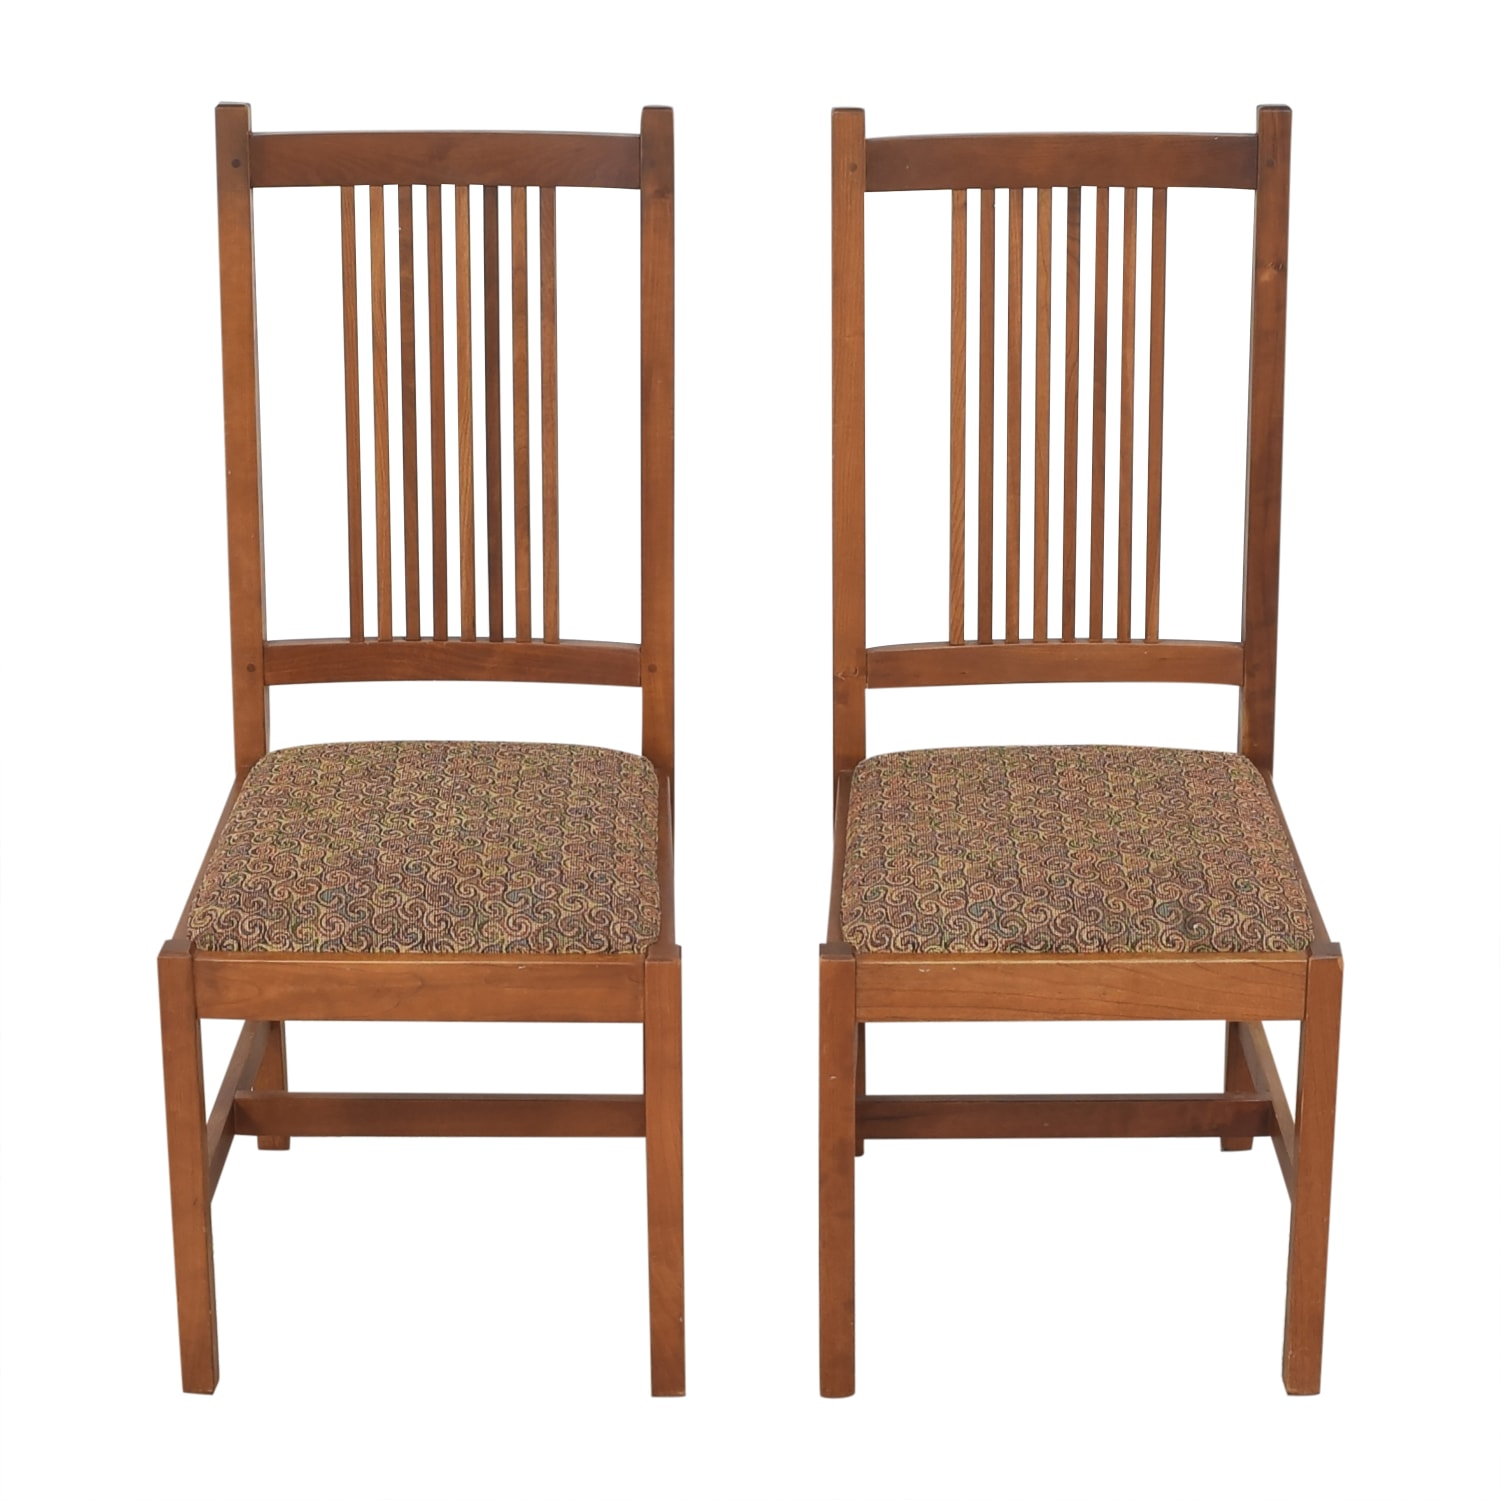 Stickley Furniture Shaker Dining Side Chairs | 47% Off | Kaiyo